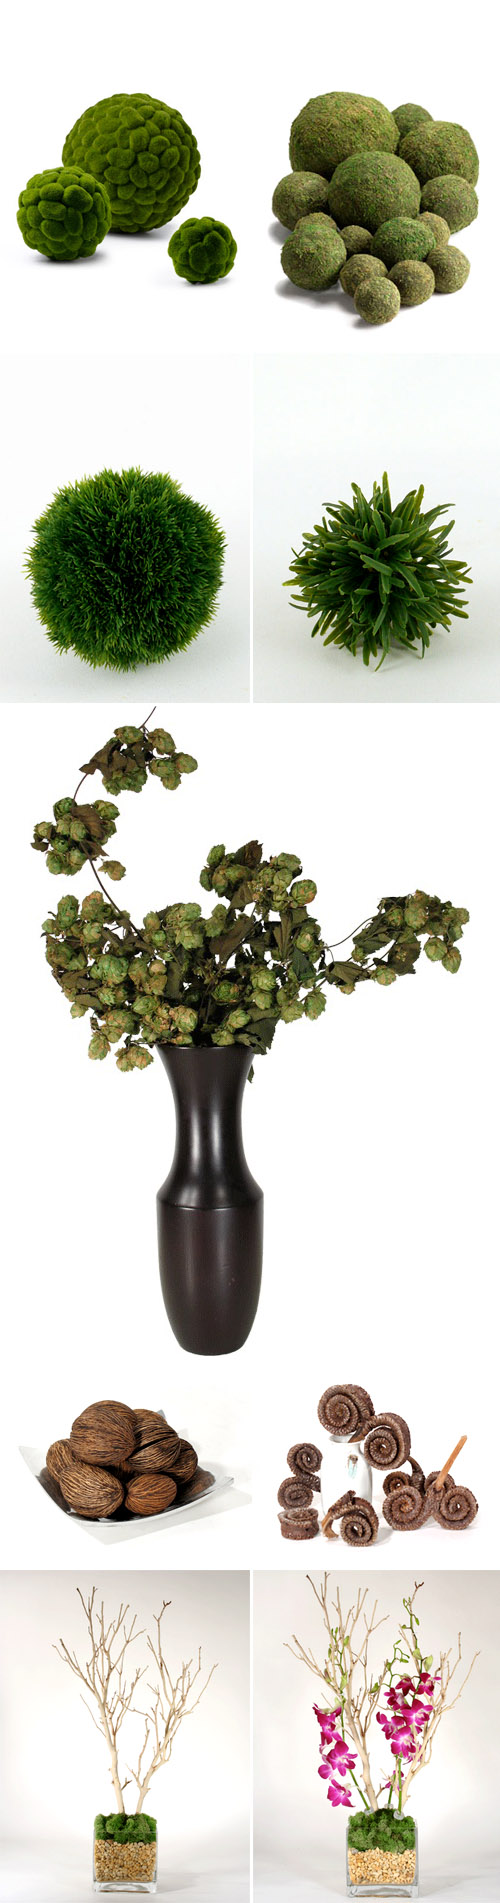 unique floral arrangements using preserved flowers, moss and seed pods, from Nettleton Hollow and Jamali Garden